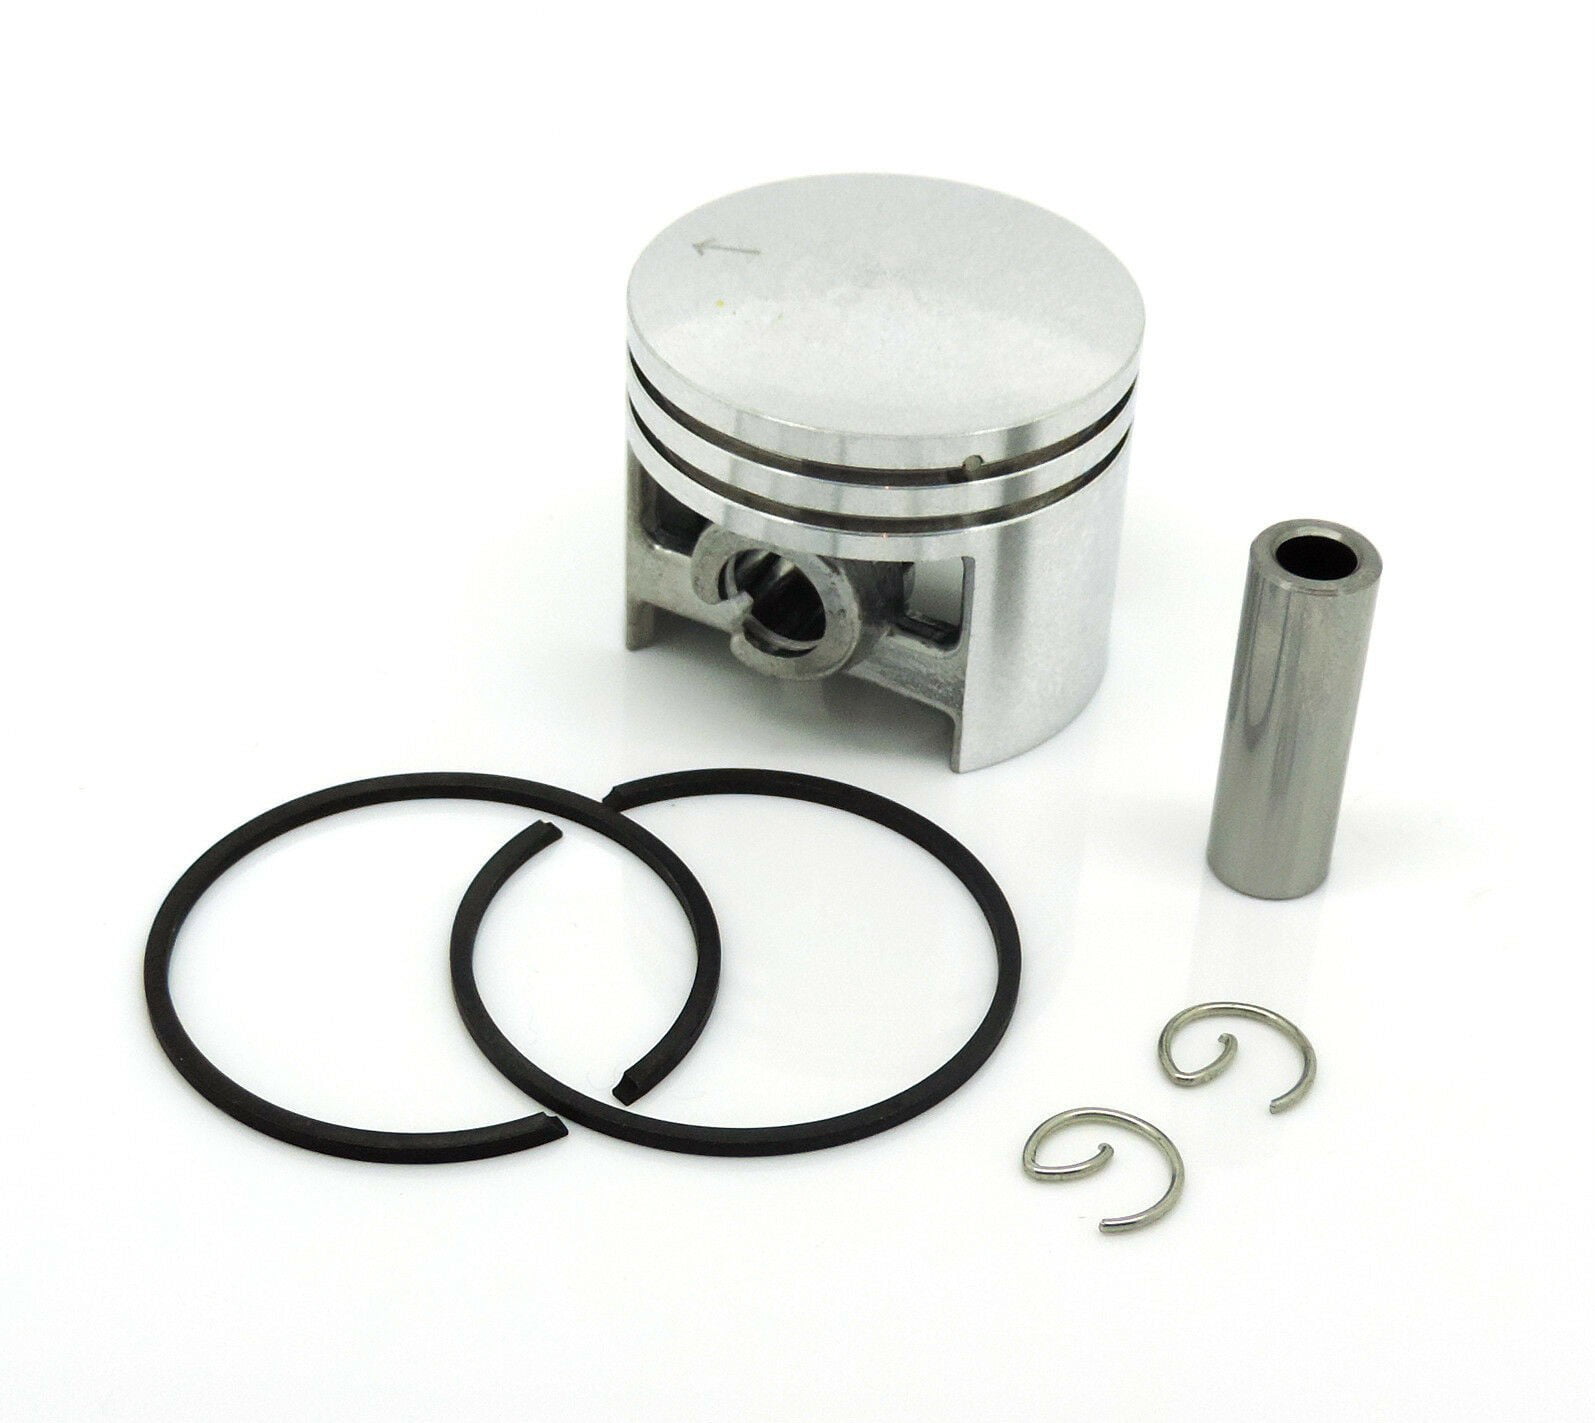 New Stihl MS440 044 Cylinder Head Piston Kit With Rings 50mm Chainsaw 12mm pin 